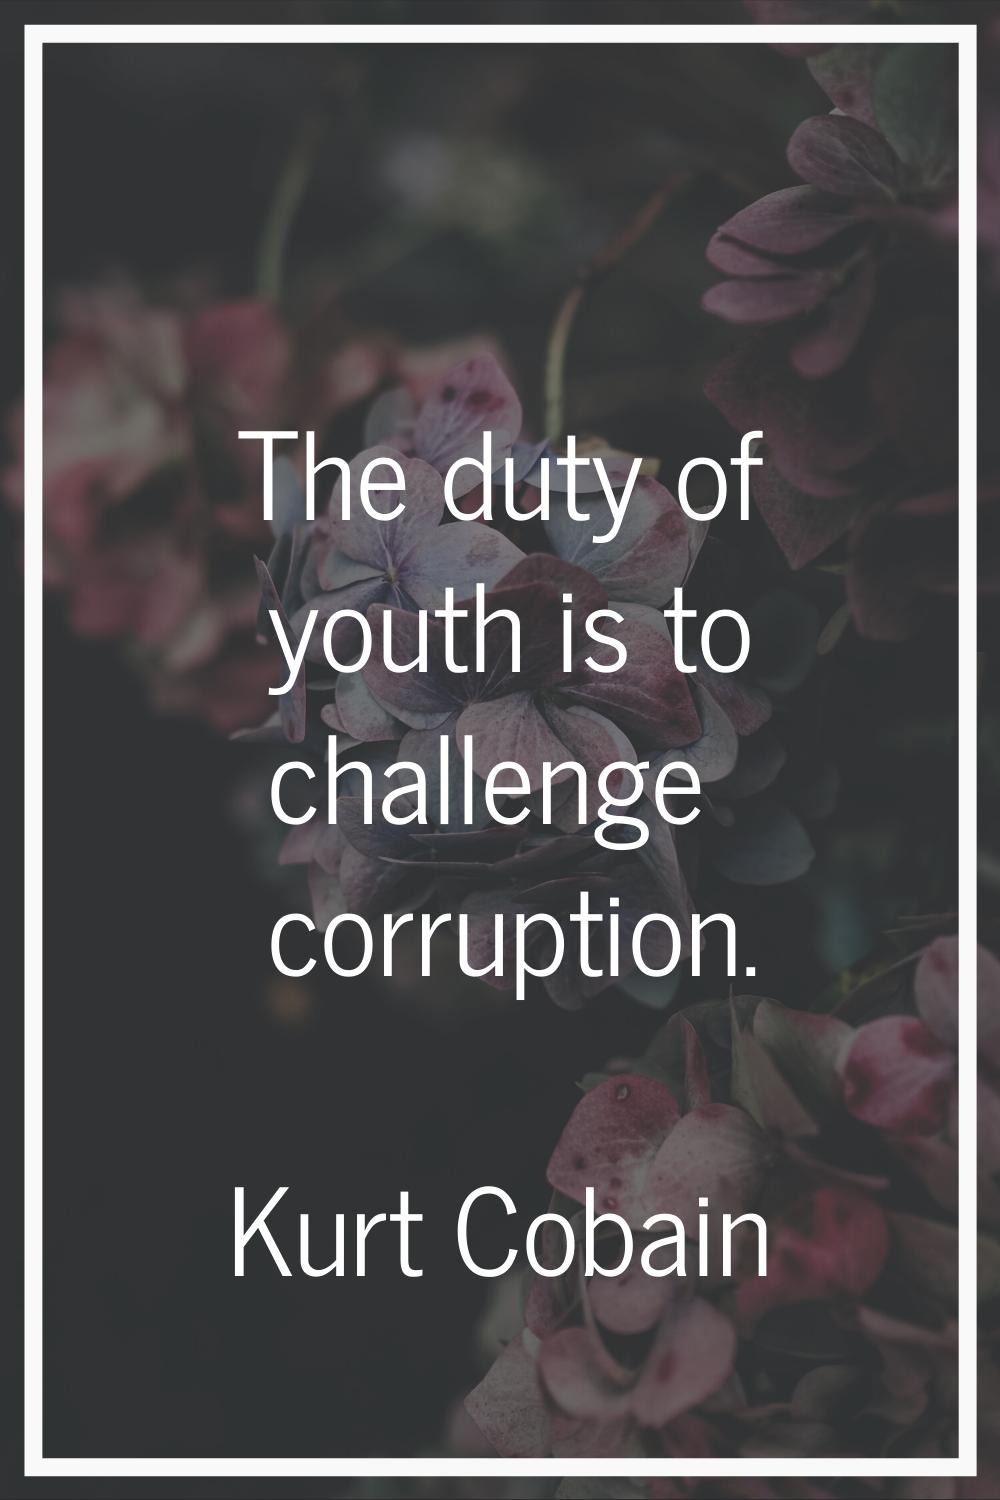 The duty of youth is to challenge corruption.